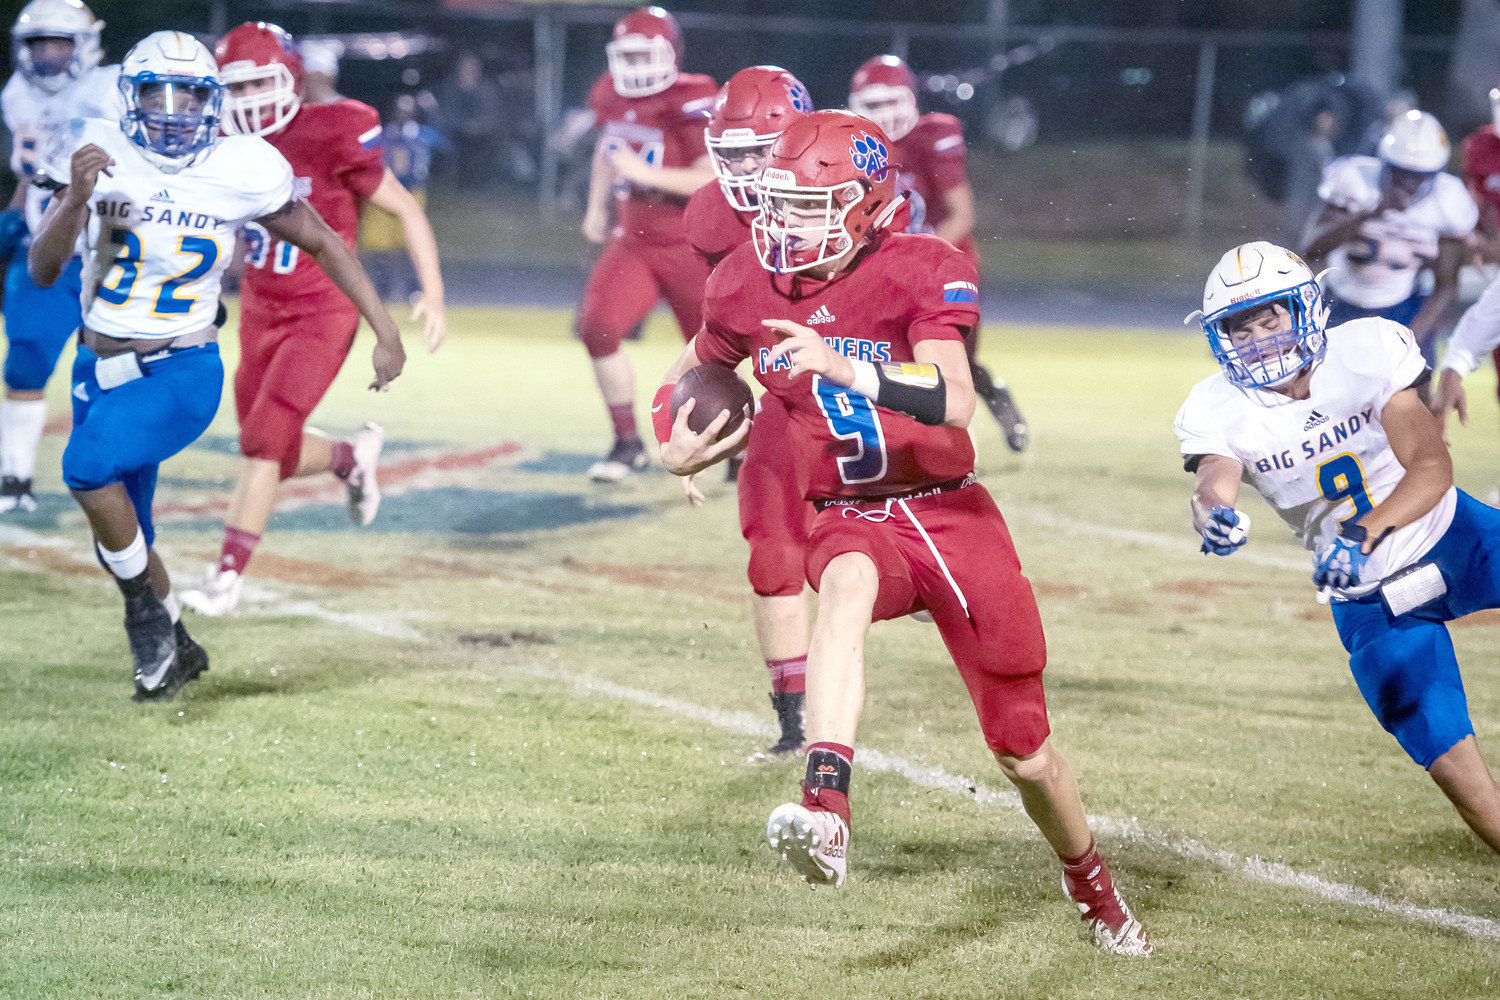 A-G Panther quarterback Zane Smith takes off on a run against Big Sandy. Big Sandy led 6-0 at the half when the game was halted due to the weather.